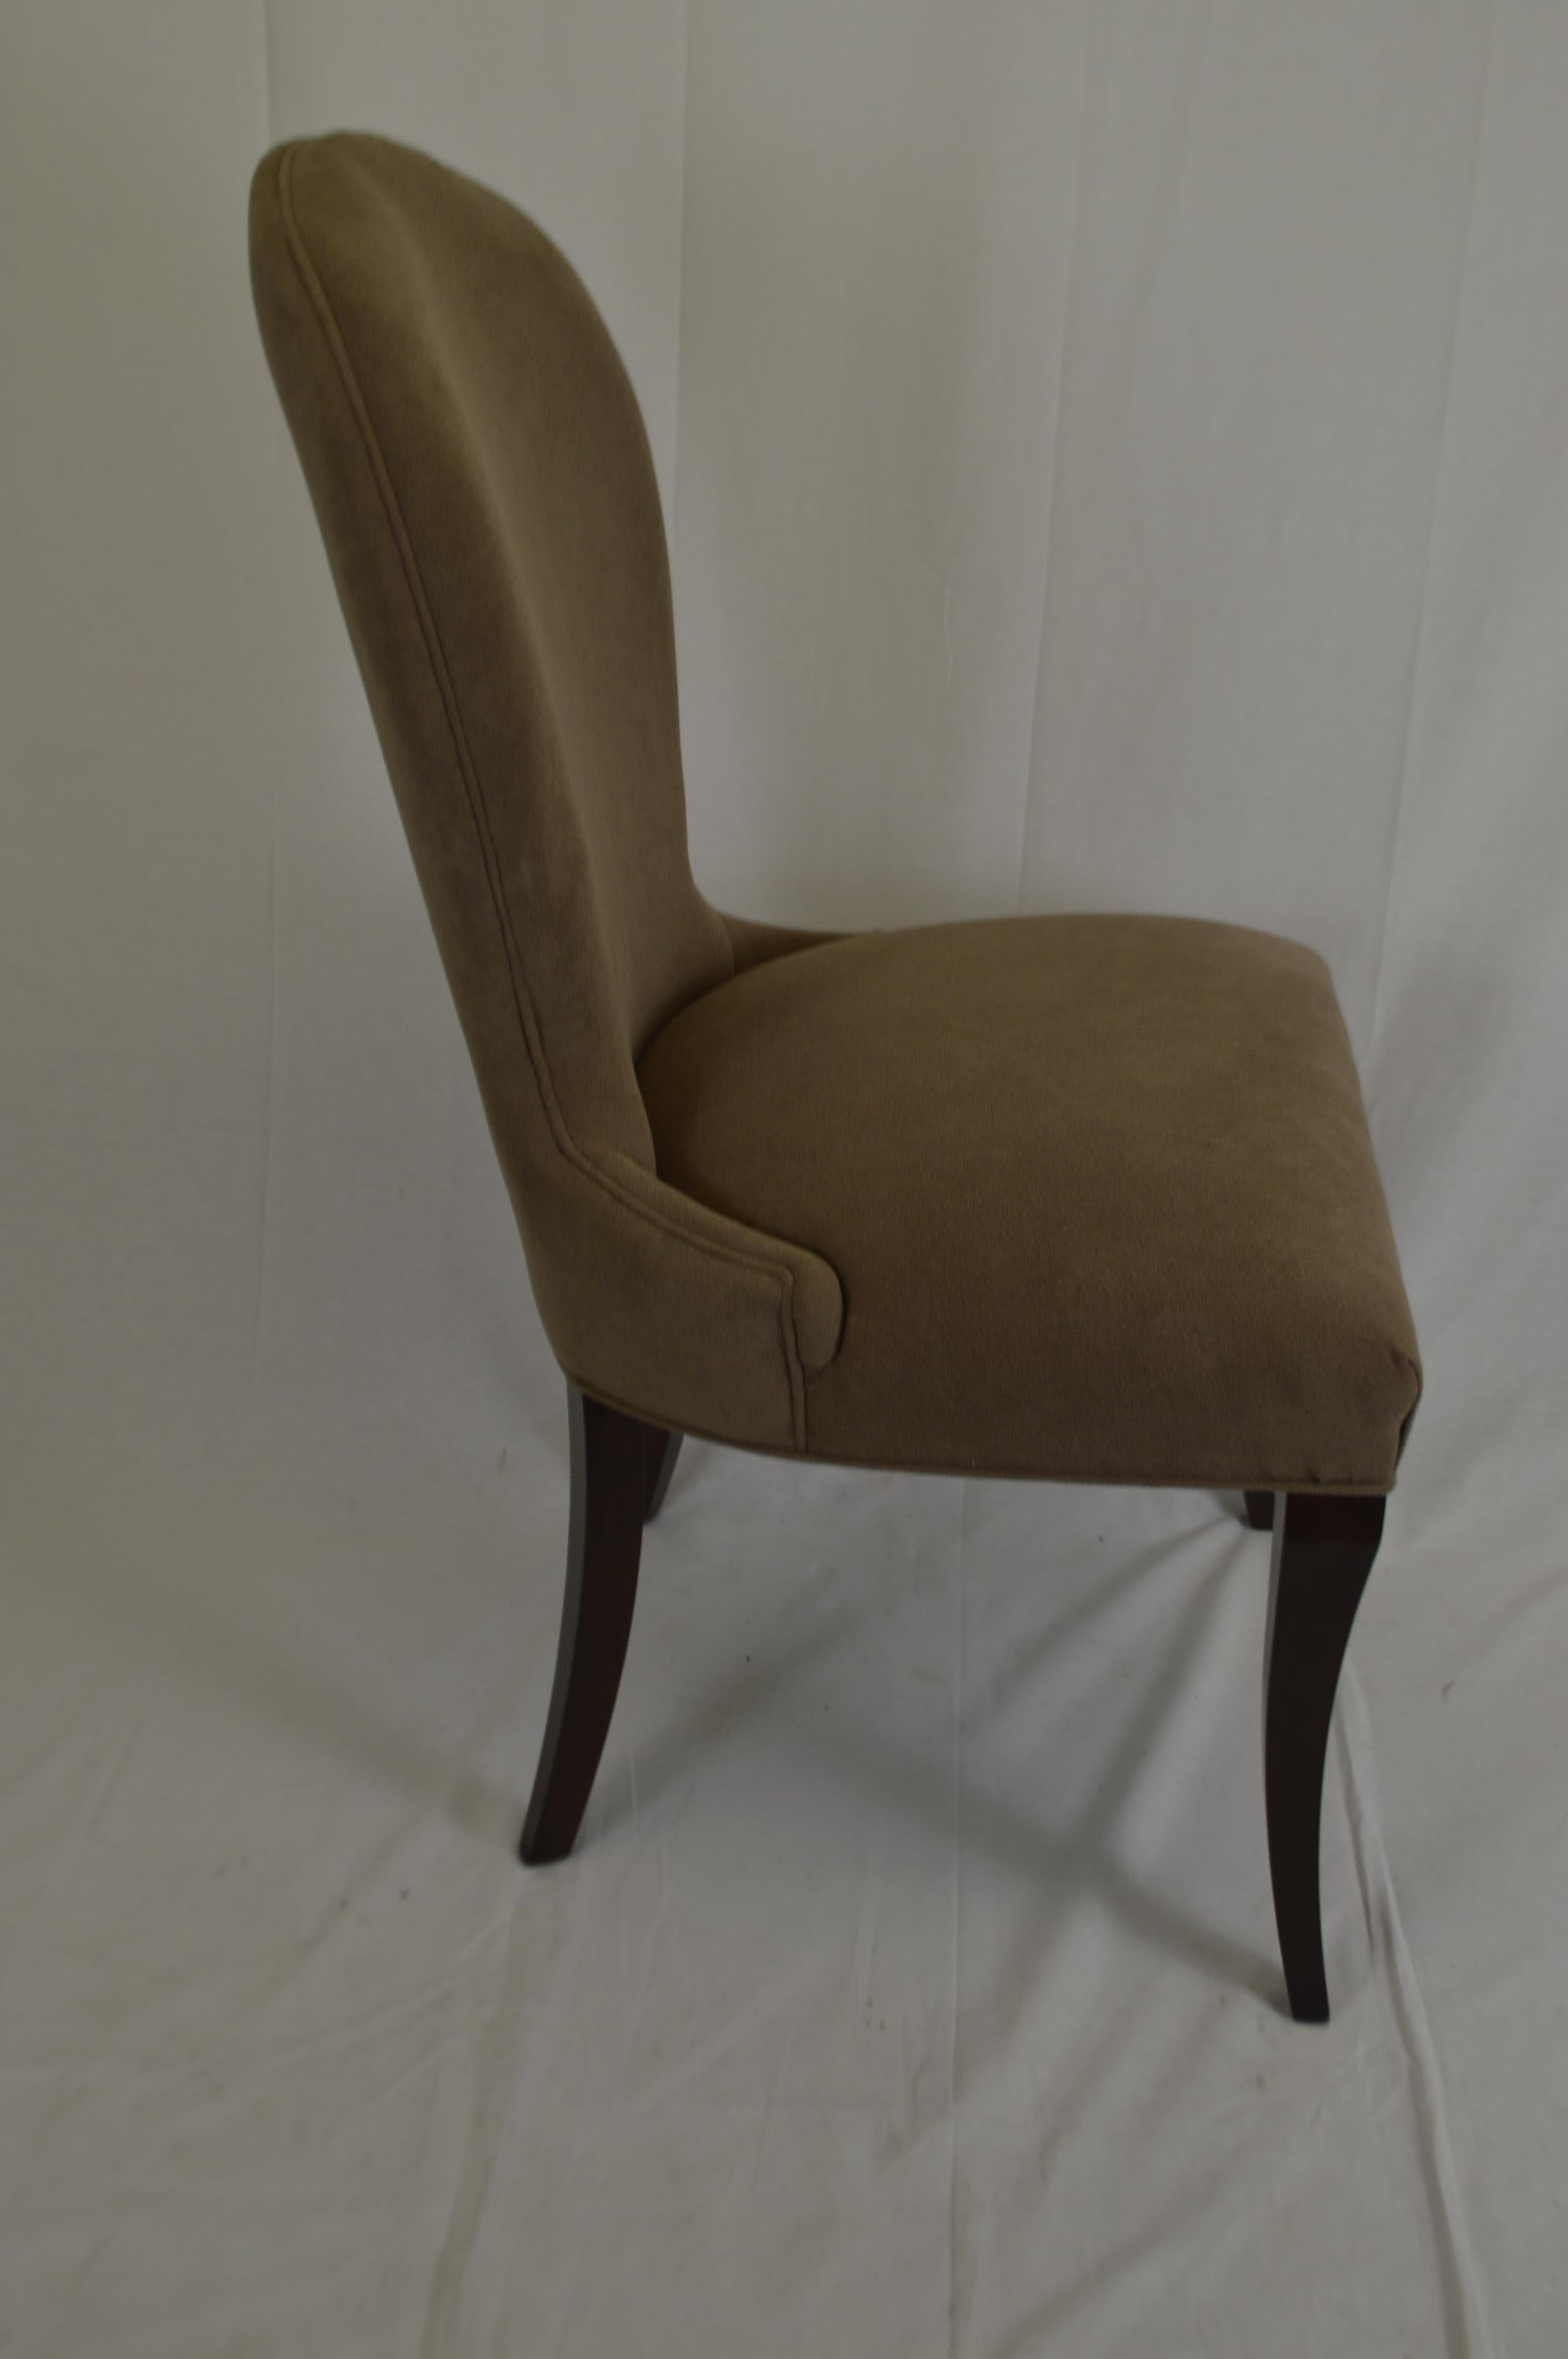 An elegant dining chair for custom finish. The wooden beech frame of this chair is made and Italy. The price includes the leg finish of your choice, painted or wood stain finish and the upholstery with your fabric.